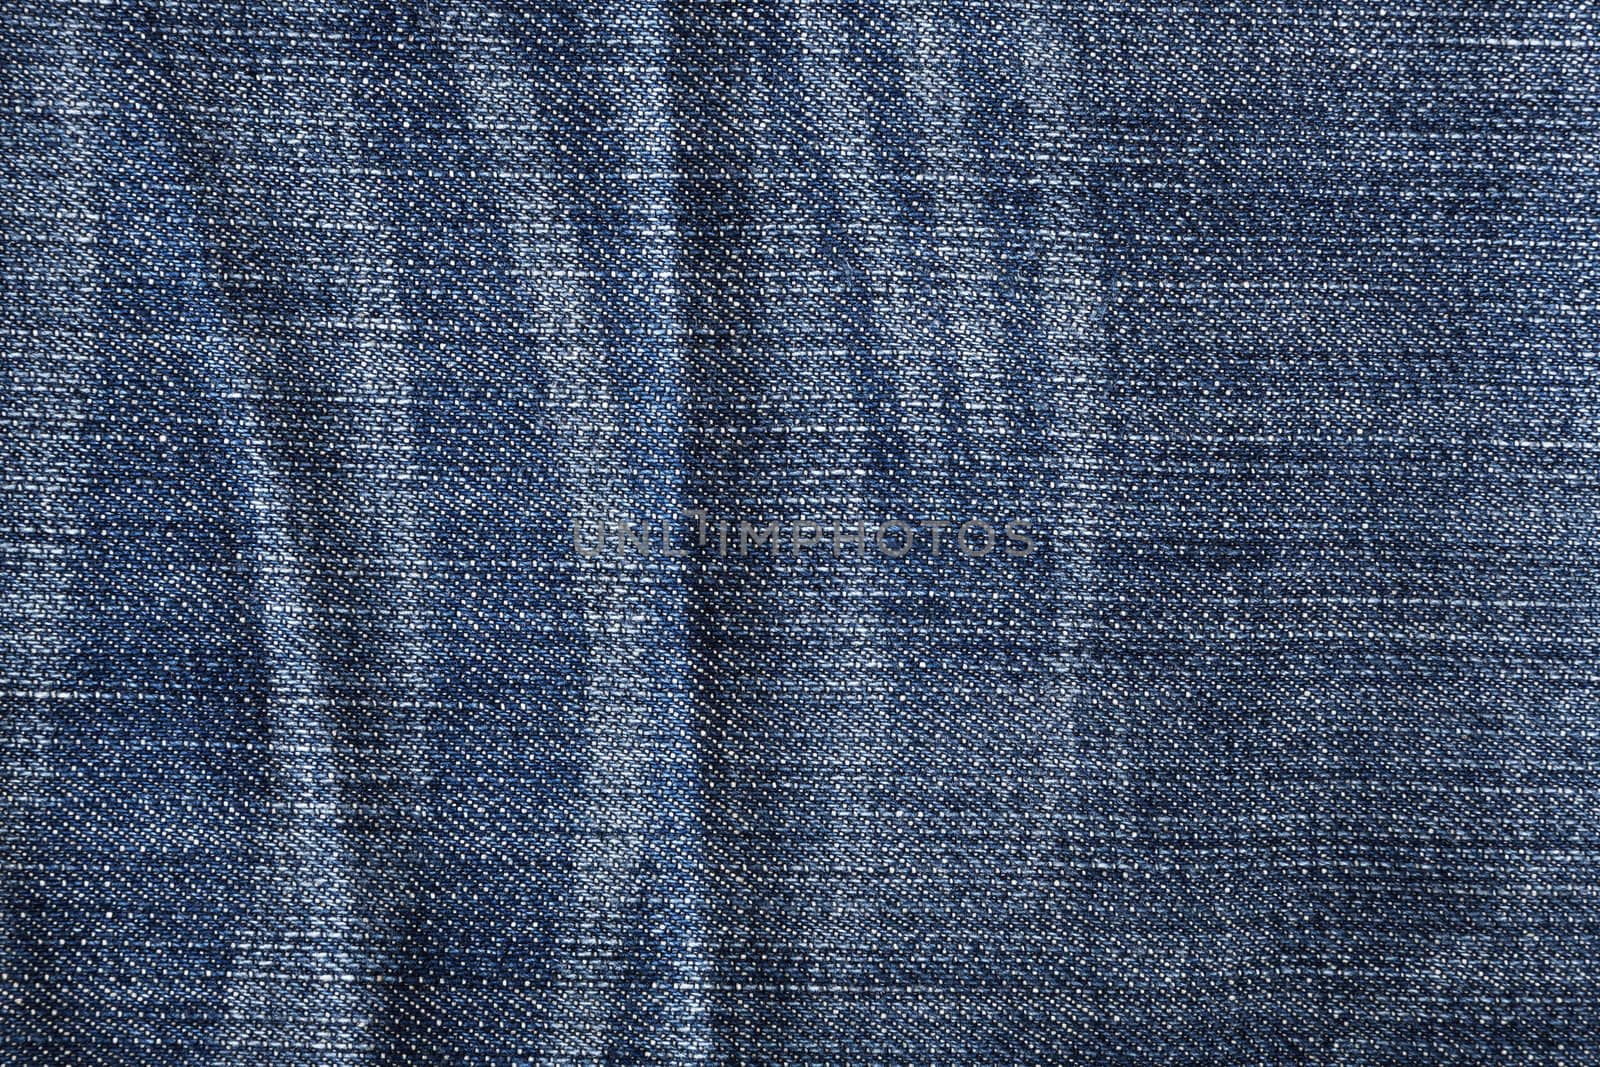 The worn blue jeans, a textile background